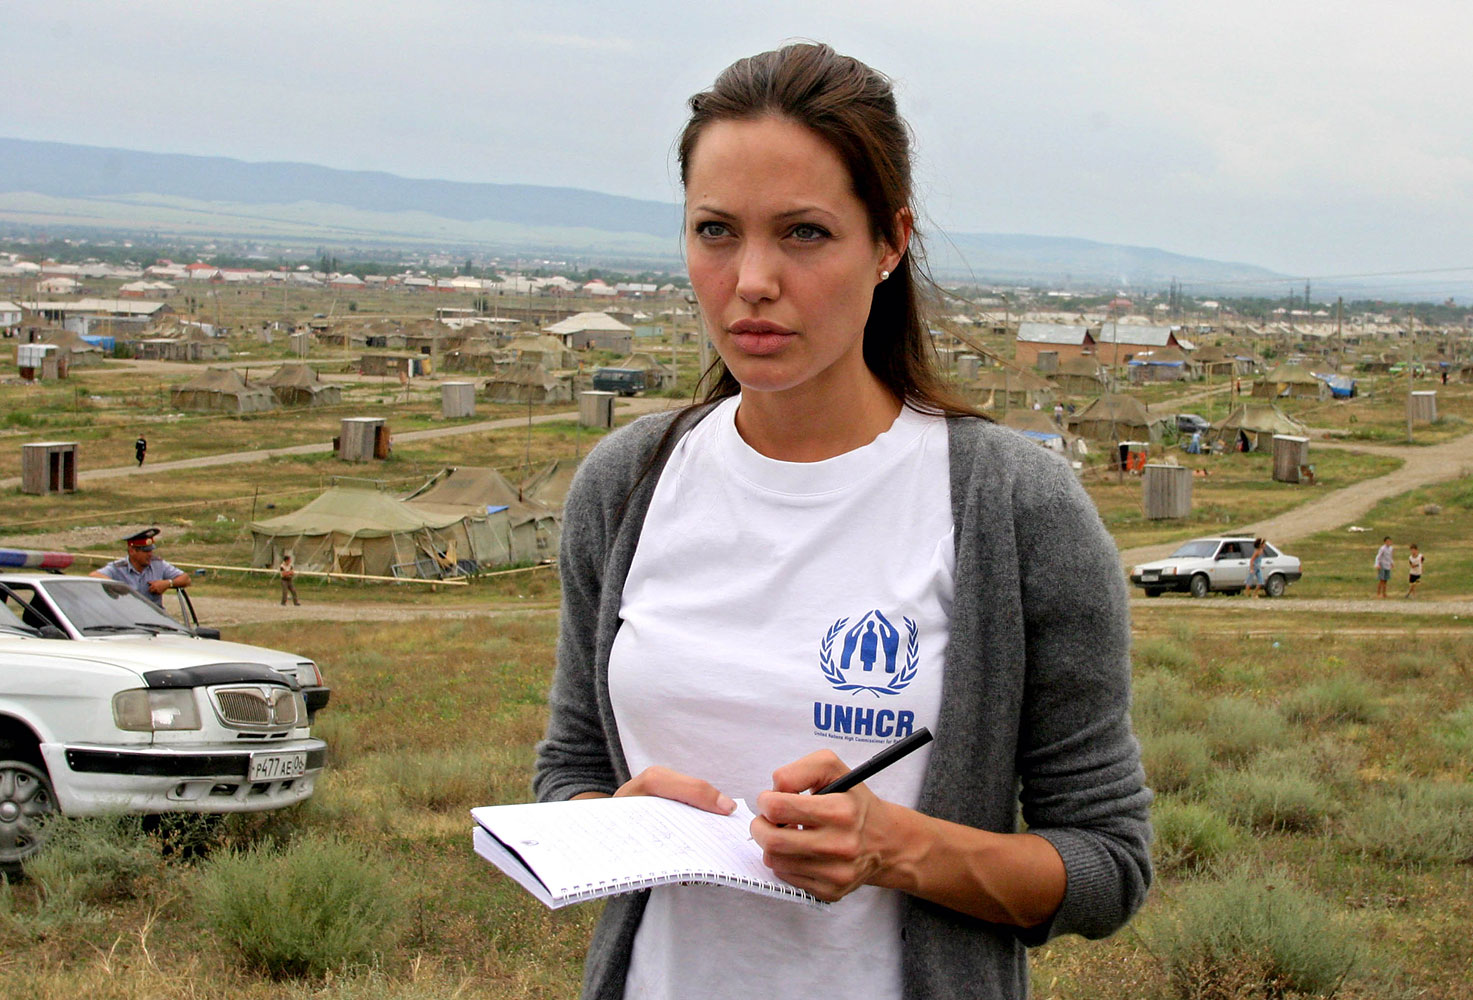 Actress Angelina Jolie visits Bella refugee camp Aug. 22, 2003 in Ingushetia, near the Chechen border in Russia's North Caucasus region.